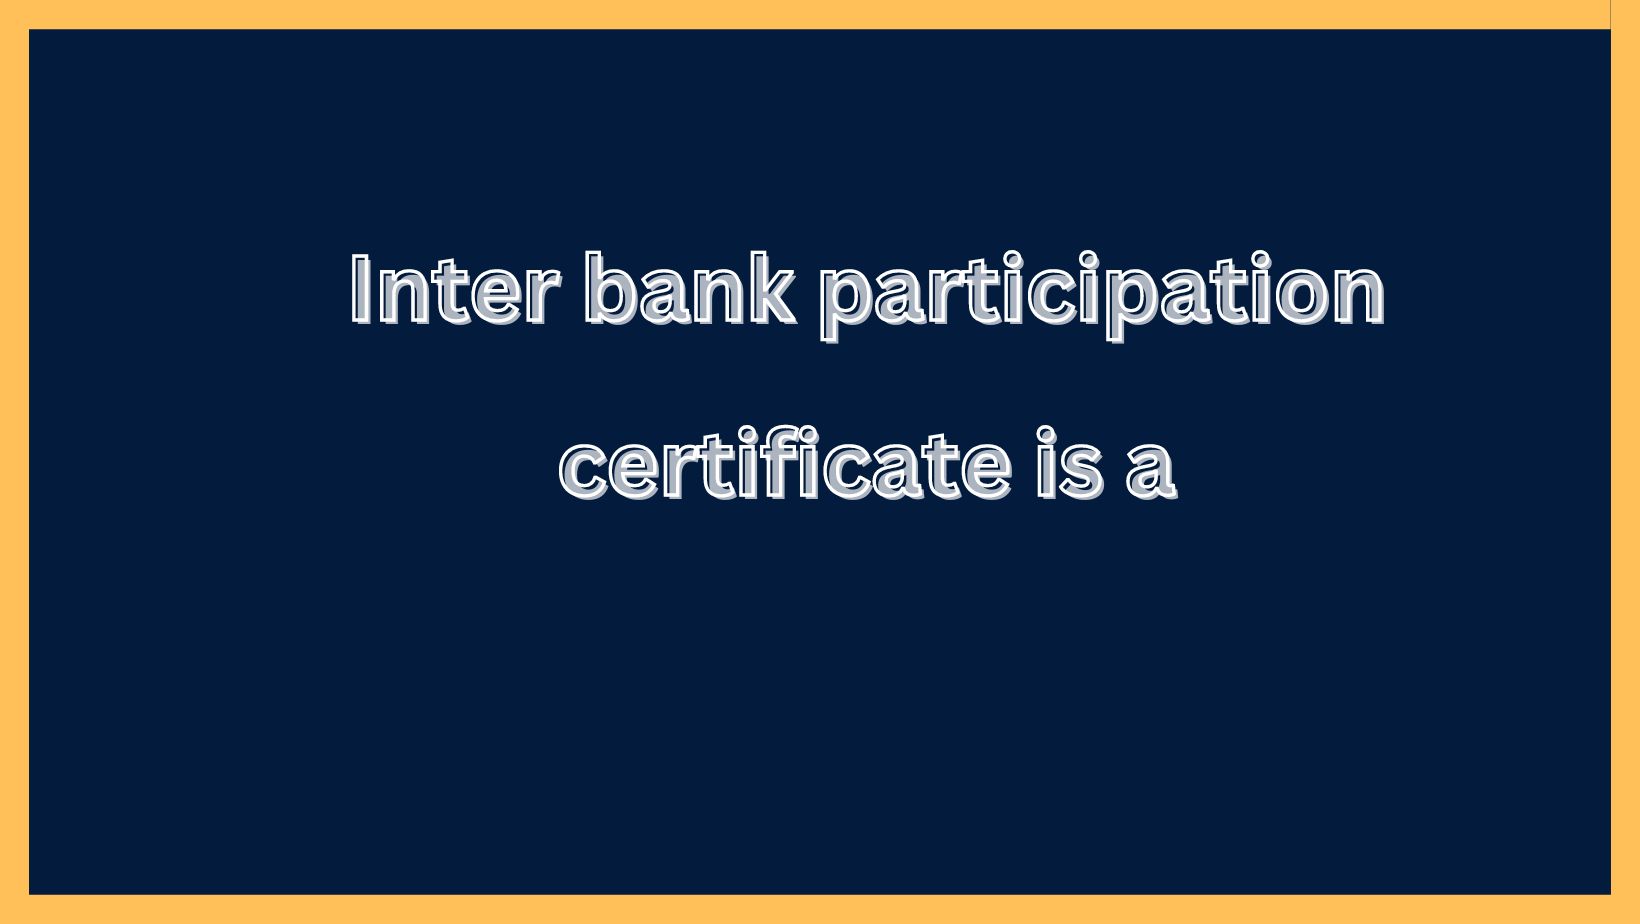 Inter bank participation certificate is a